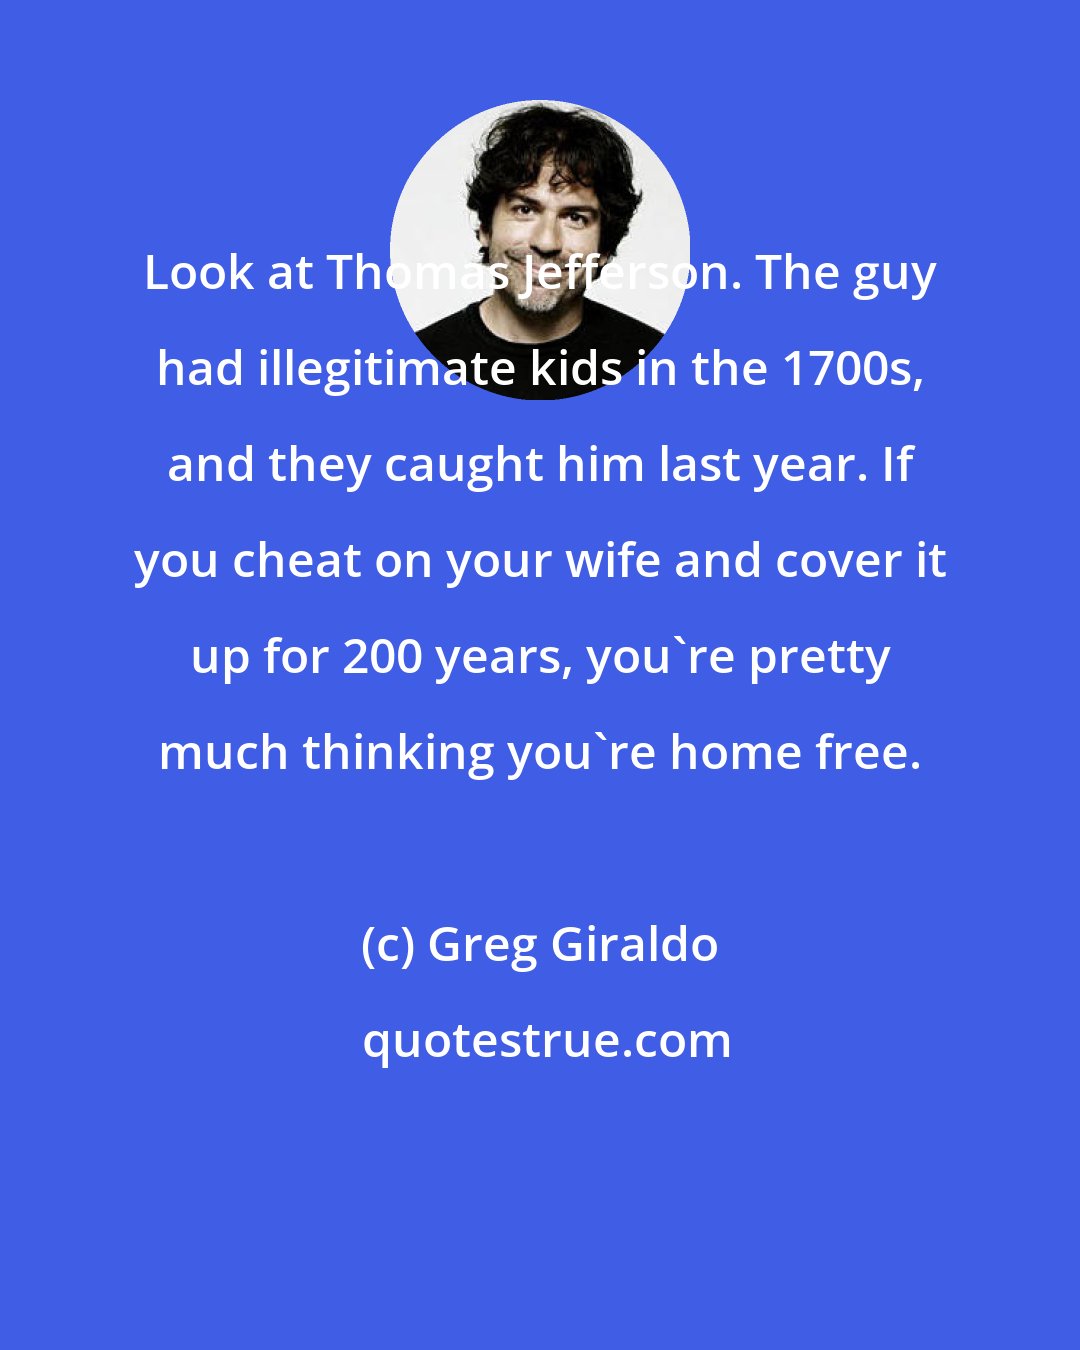 Greg Giraldo: Look at Thomas Jefferson. The guy had illegitimate kids in the 1700s, and they caught him last year. If you cheat on your wife and cover it up for 200 years, you're pretty much thinking you're home free.